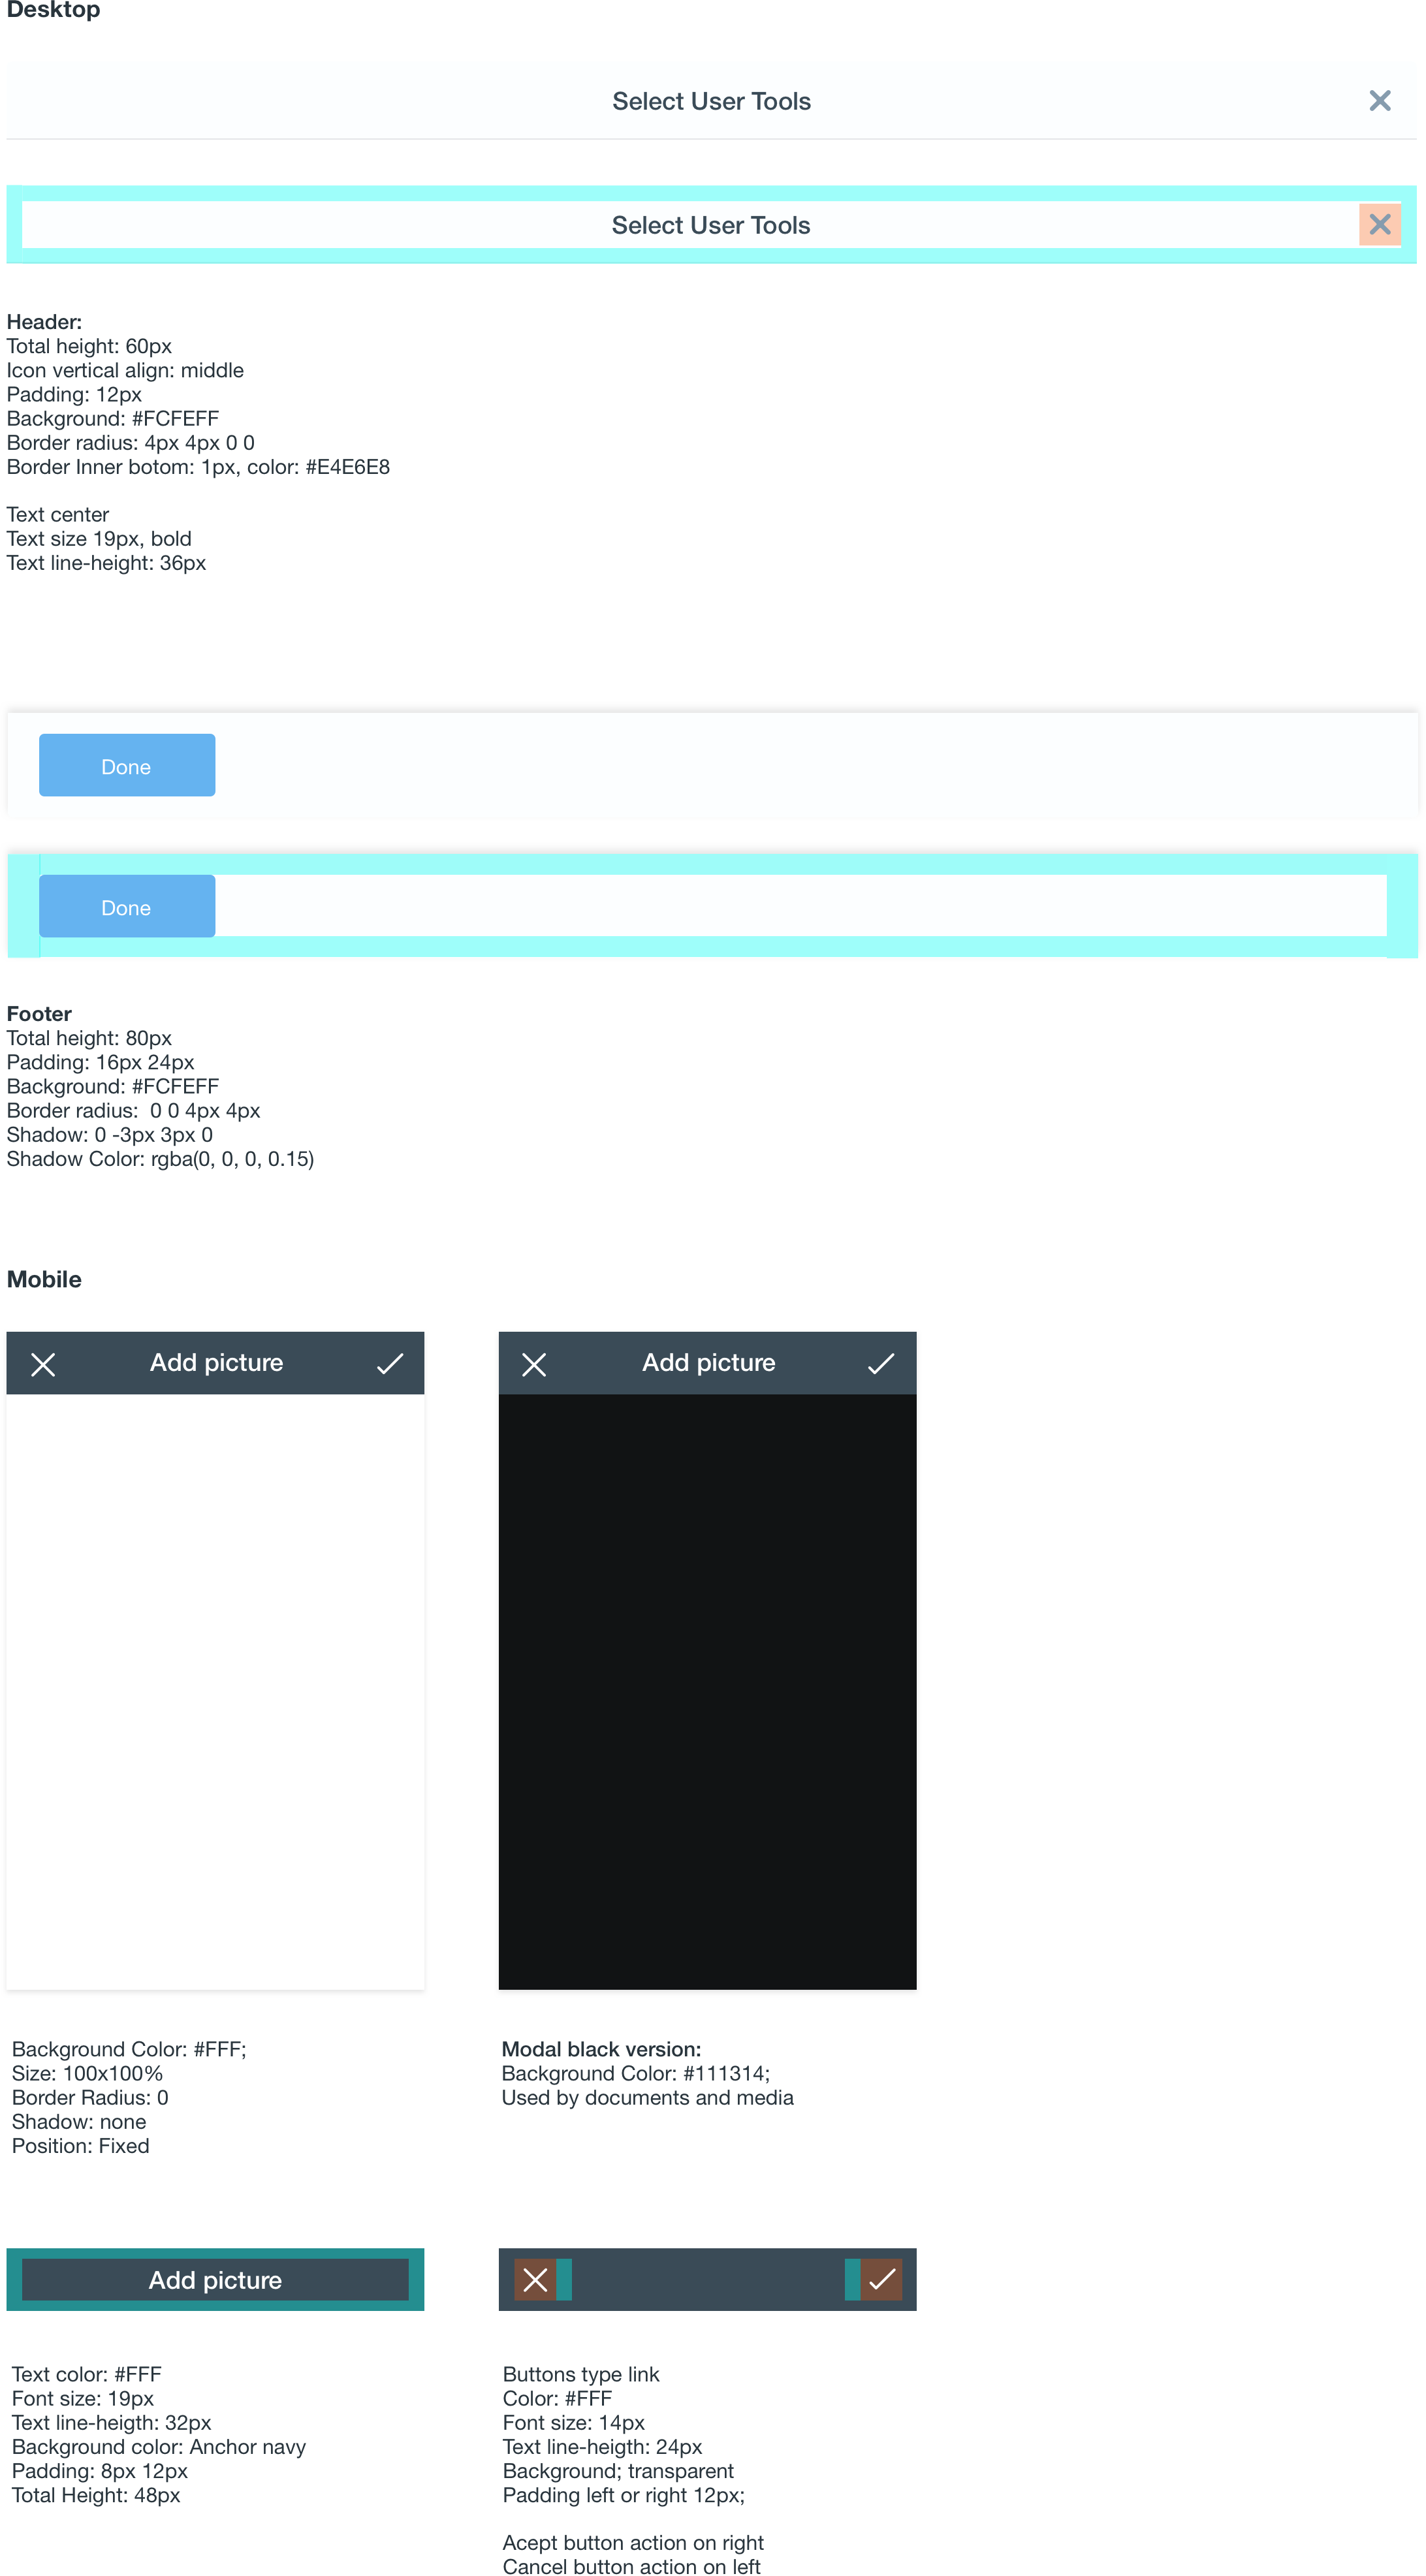 modal attributes for desktop and mobile